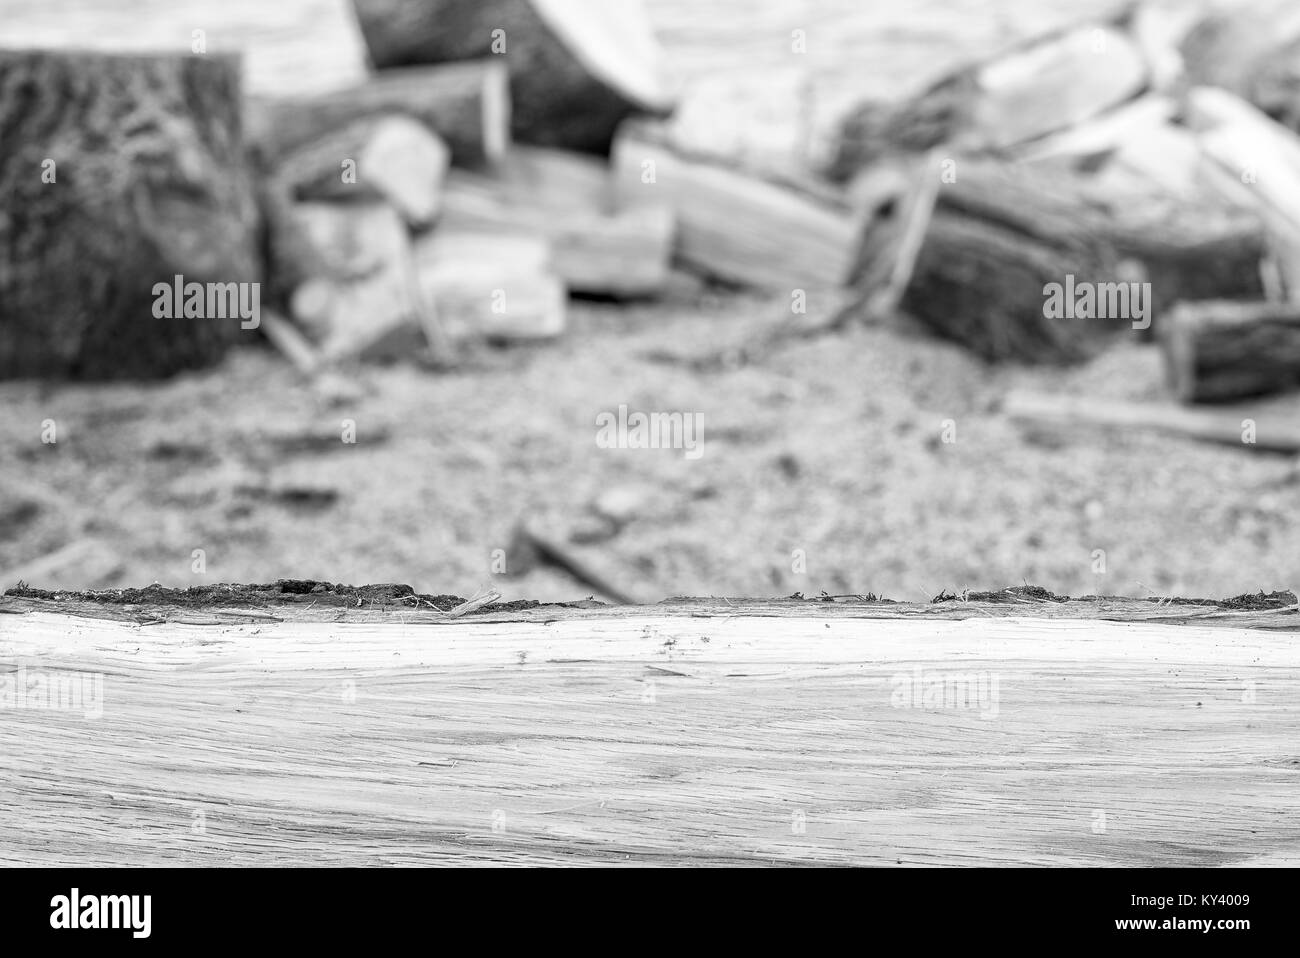 Oak firewood in front of blurry background with copy space, black and white effect Stock Photo